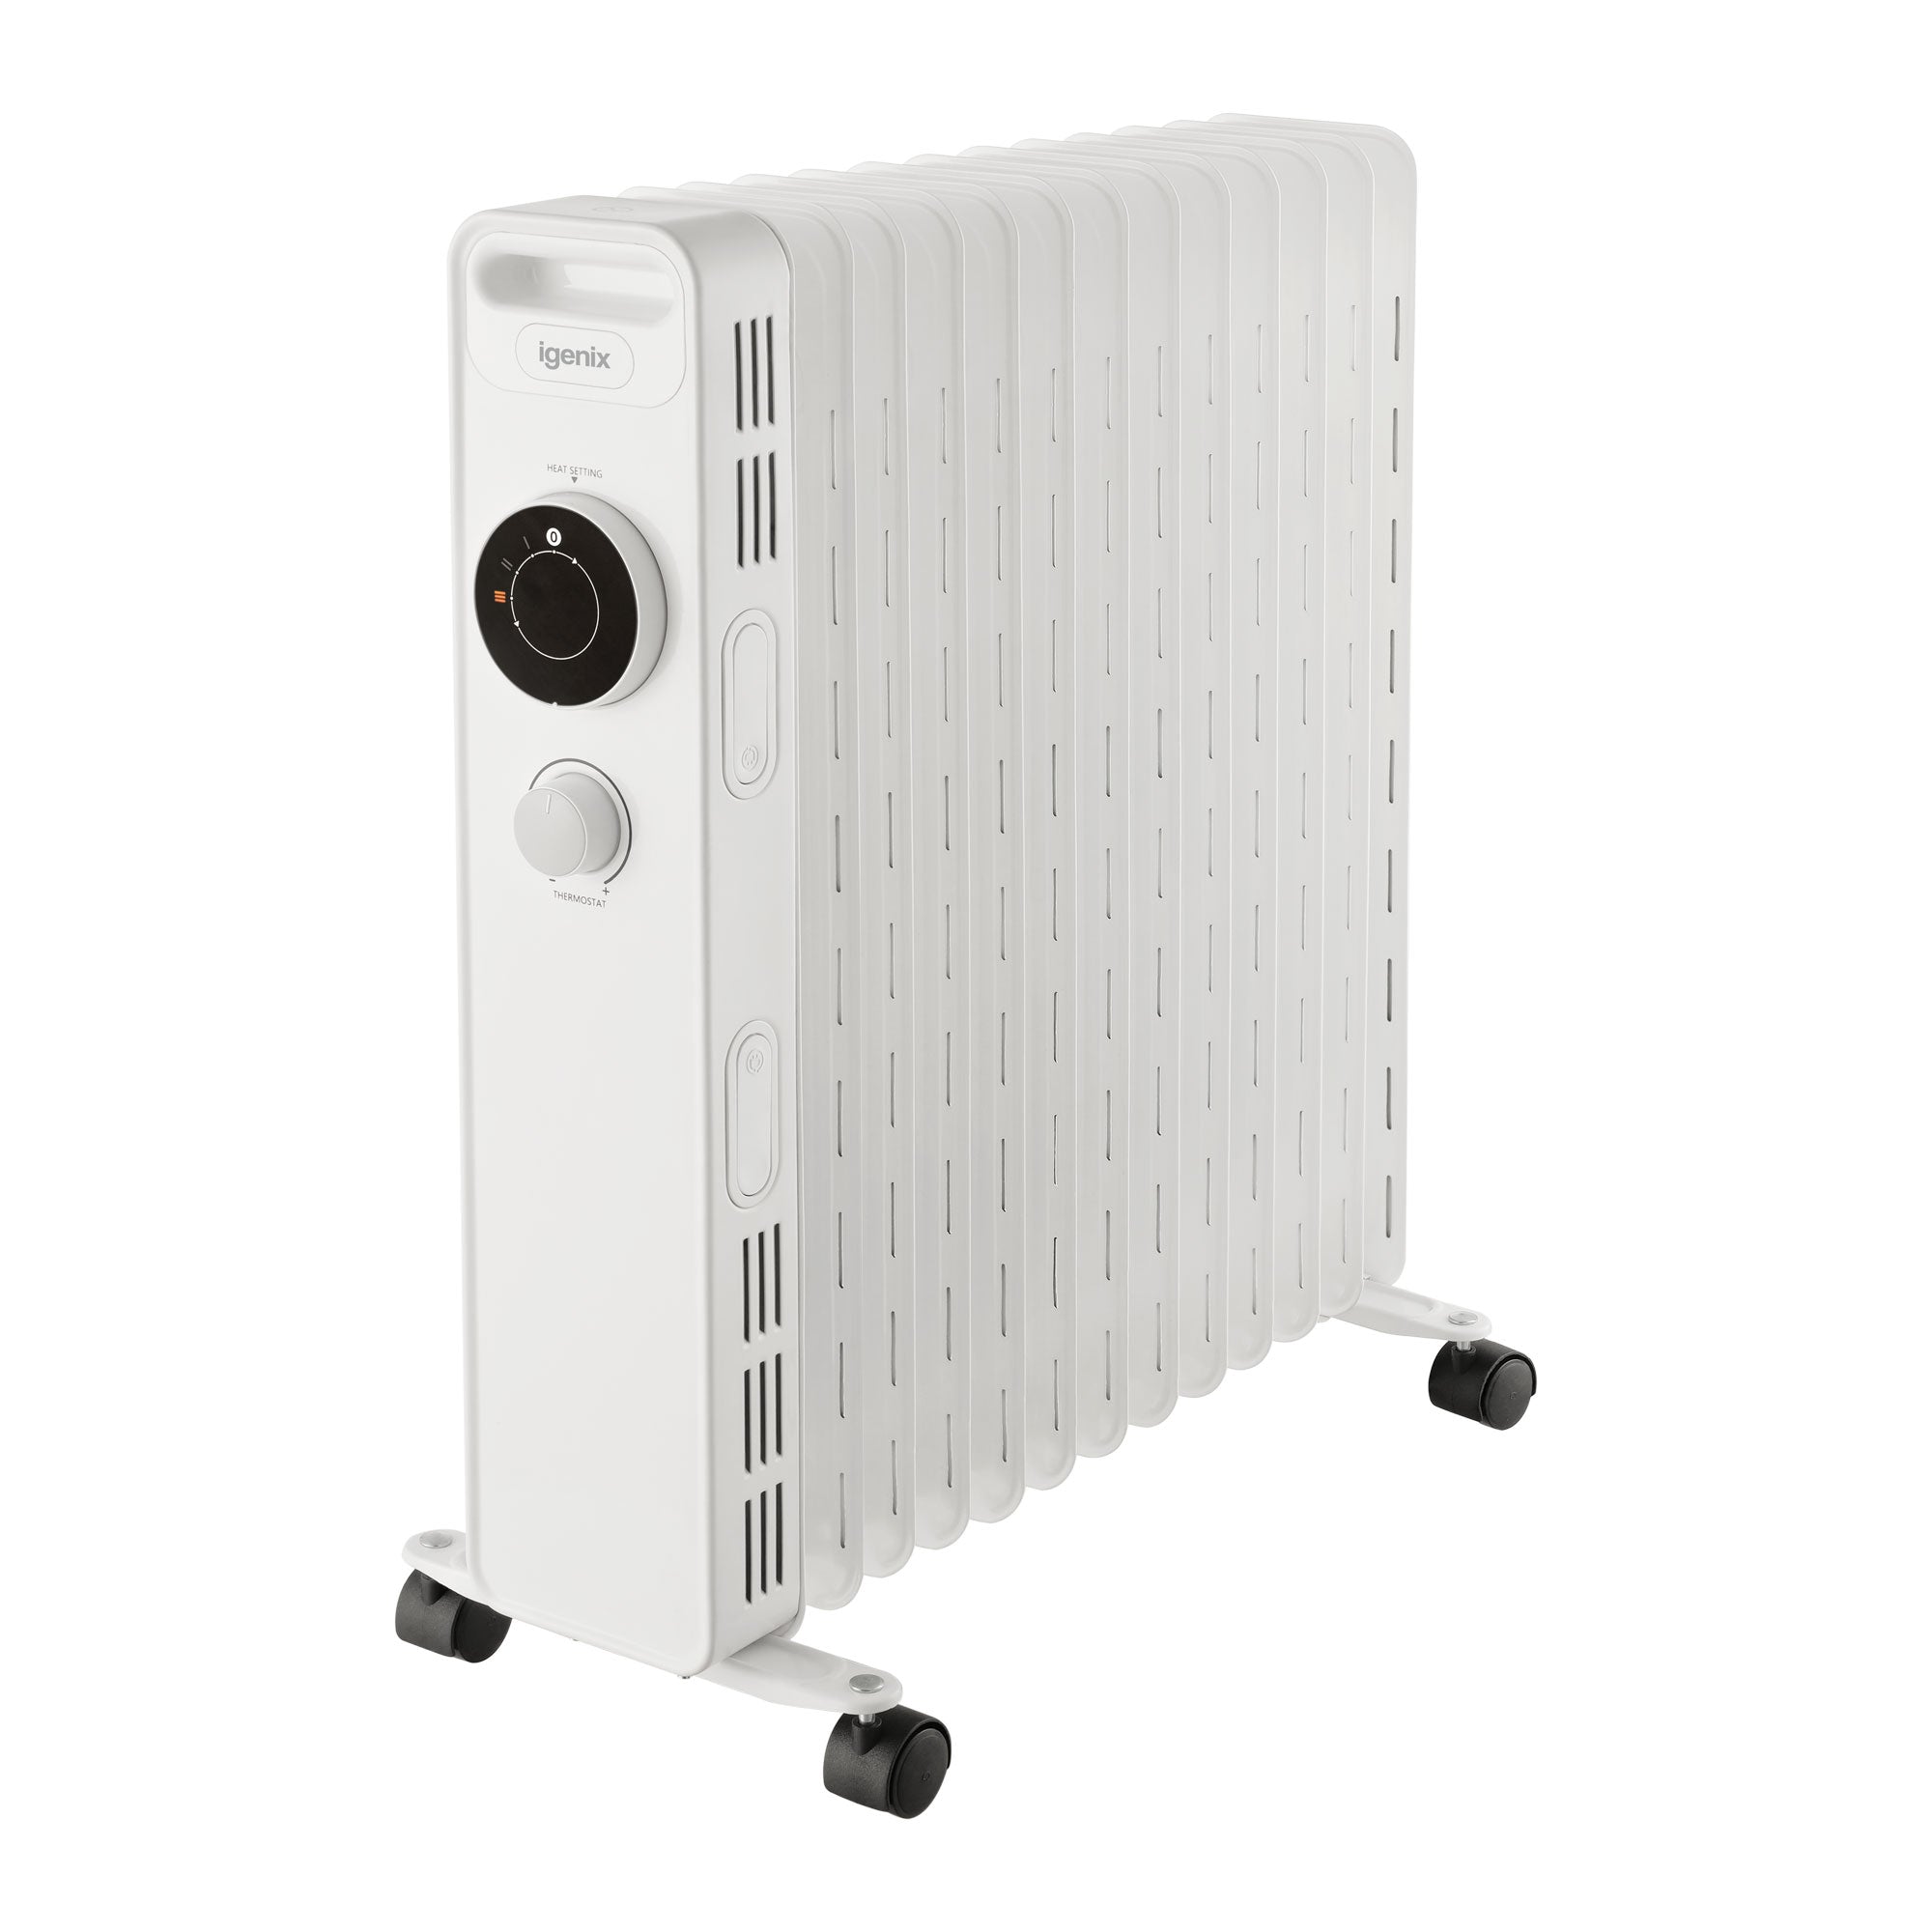 Oil Filled Radiator, 2.5kW/2500W, Overheat Protection, White